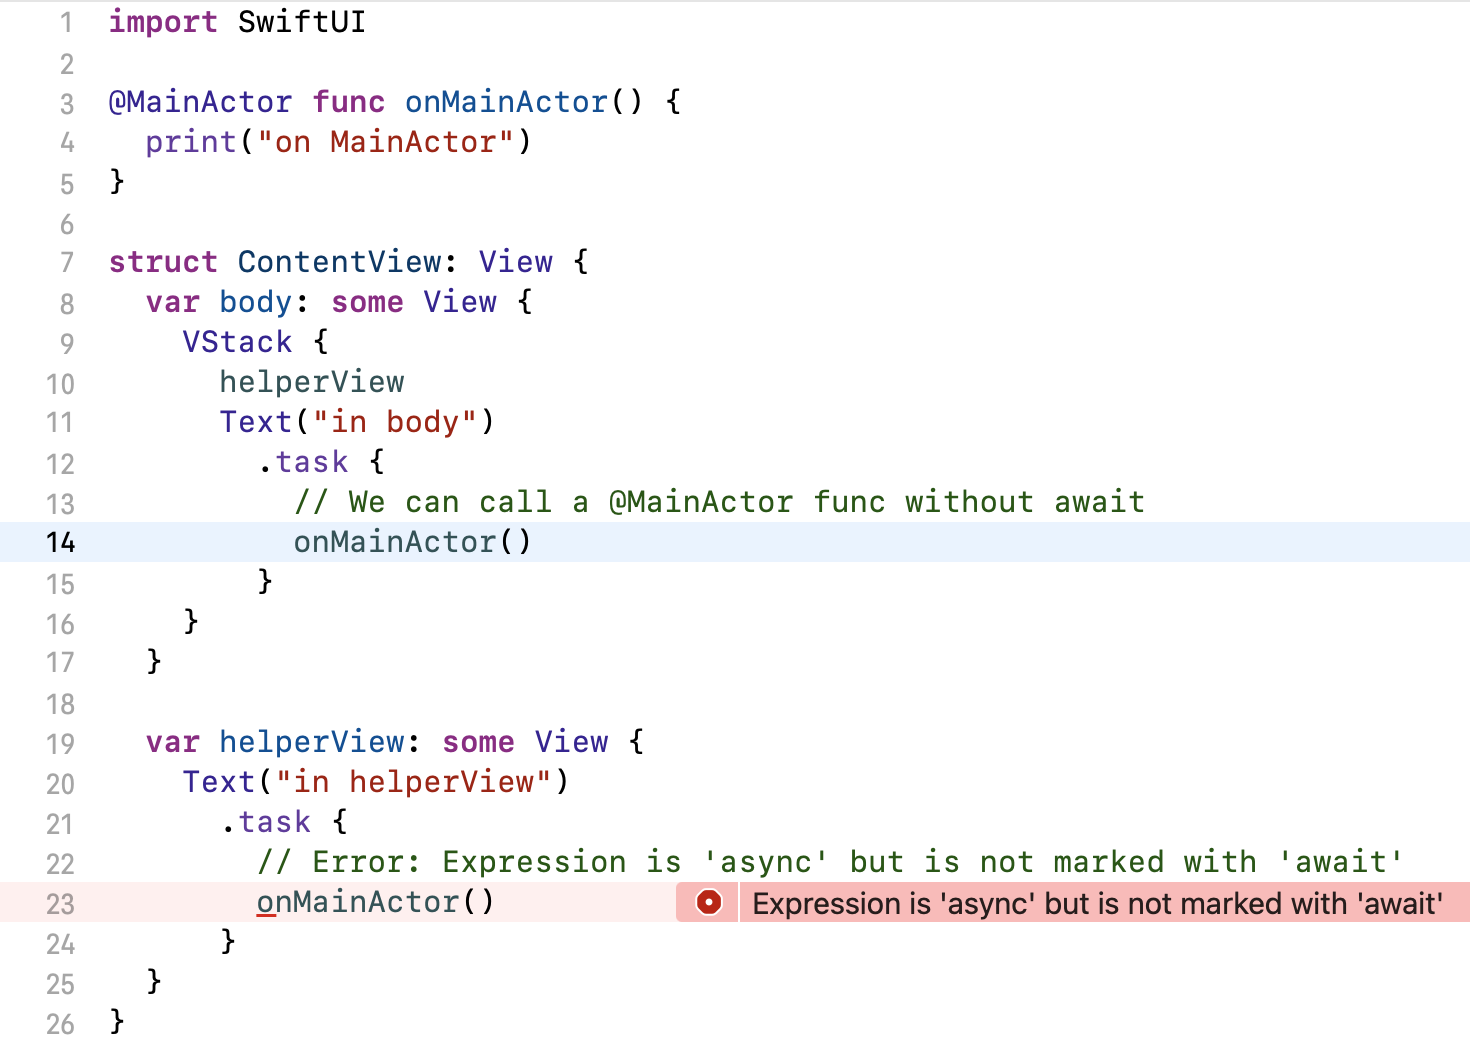 Xcode showing the compiler diagnostic 'Expression is 'async' but is not marked with await'